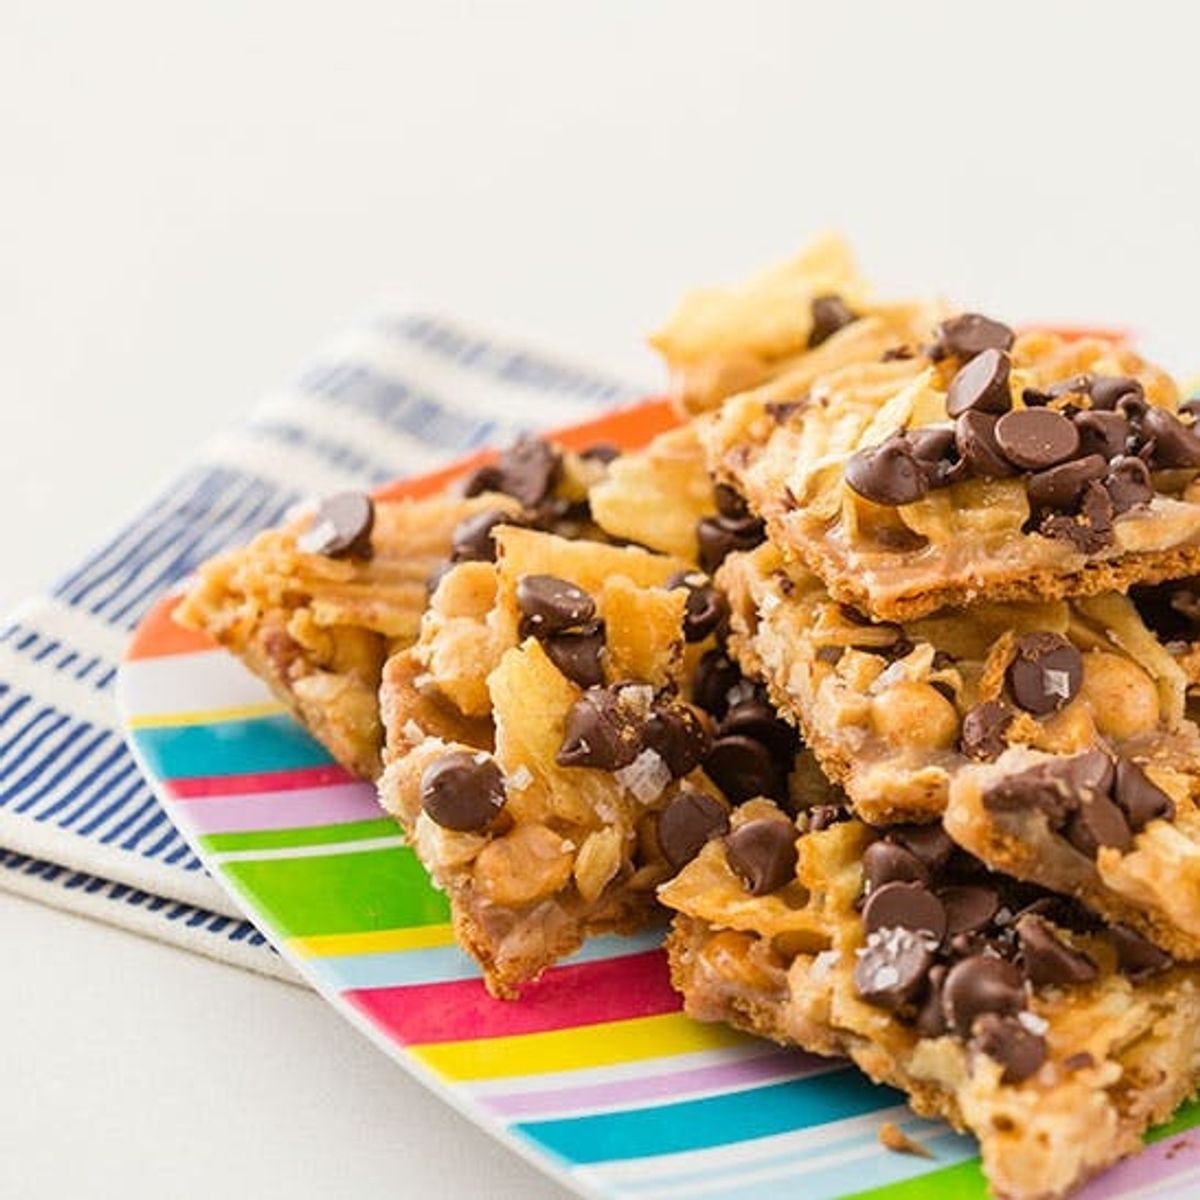 These Sweet and Salty Toffee Graham Bars Have Your Name on Them